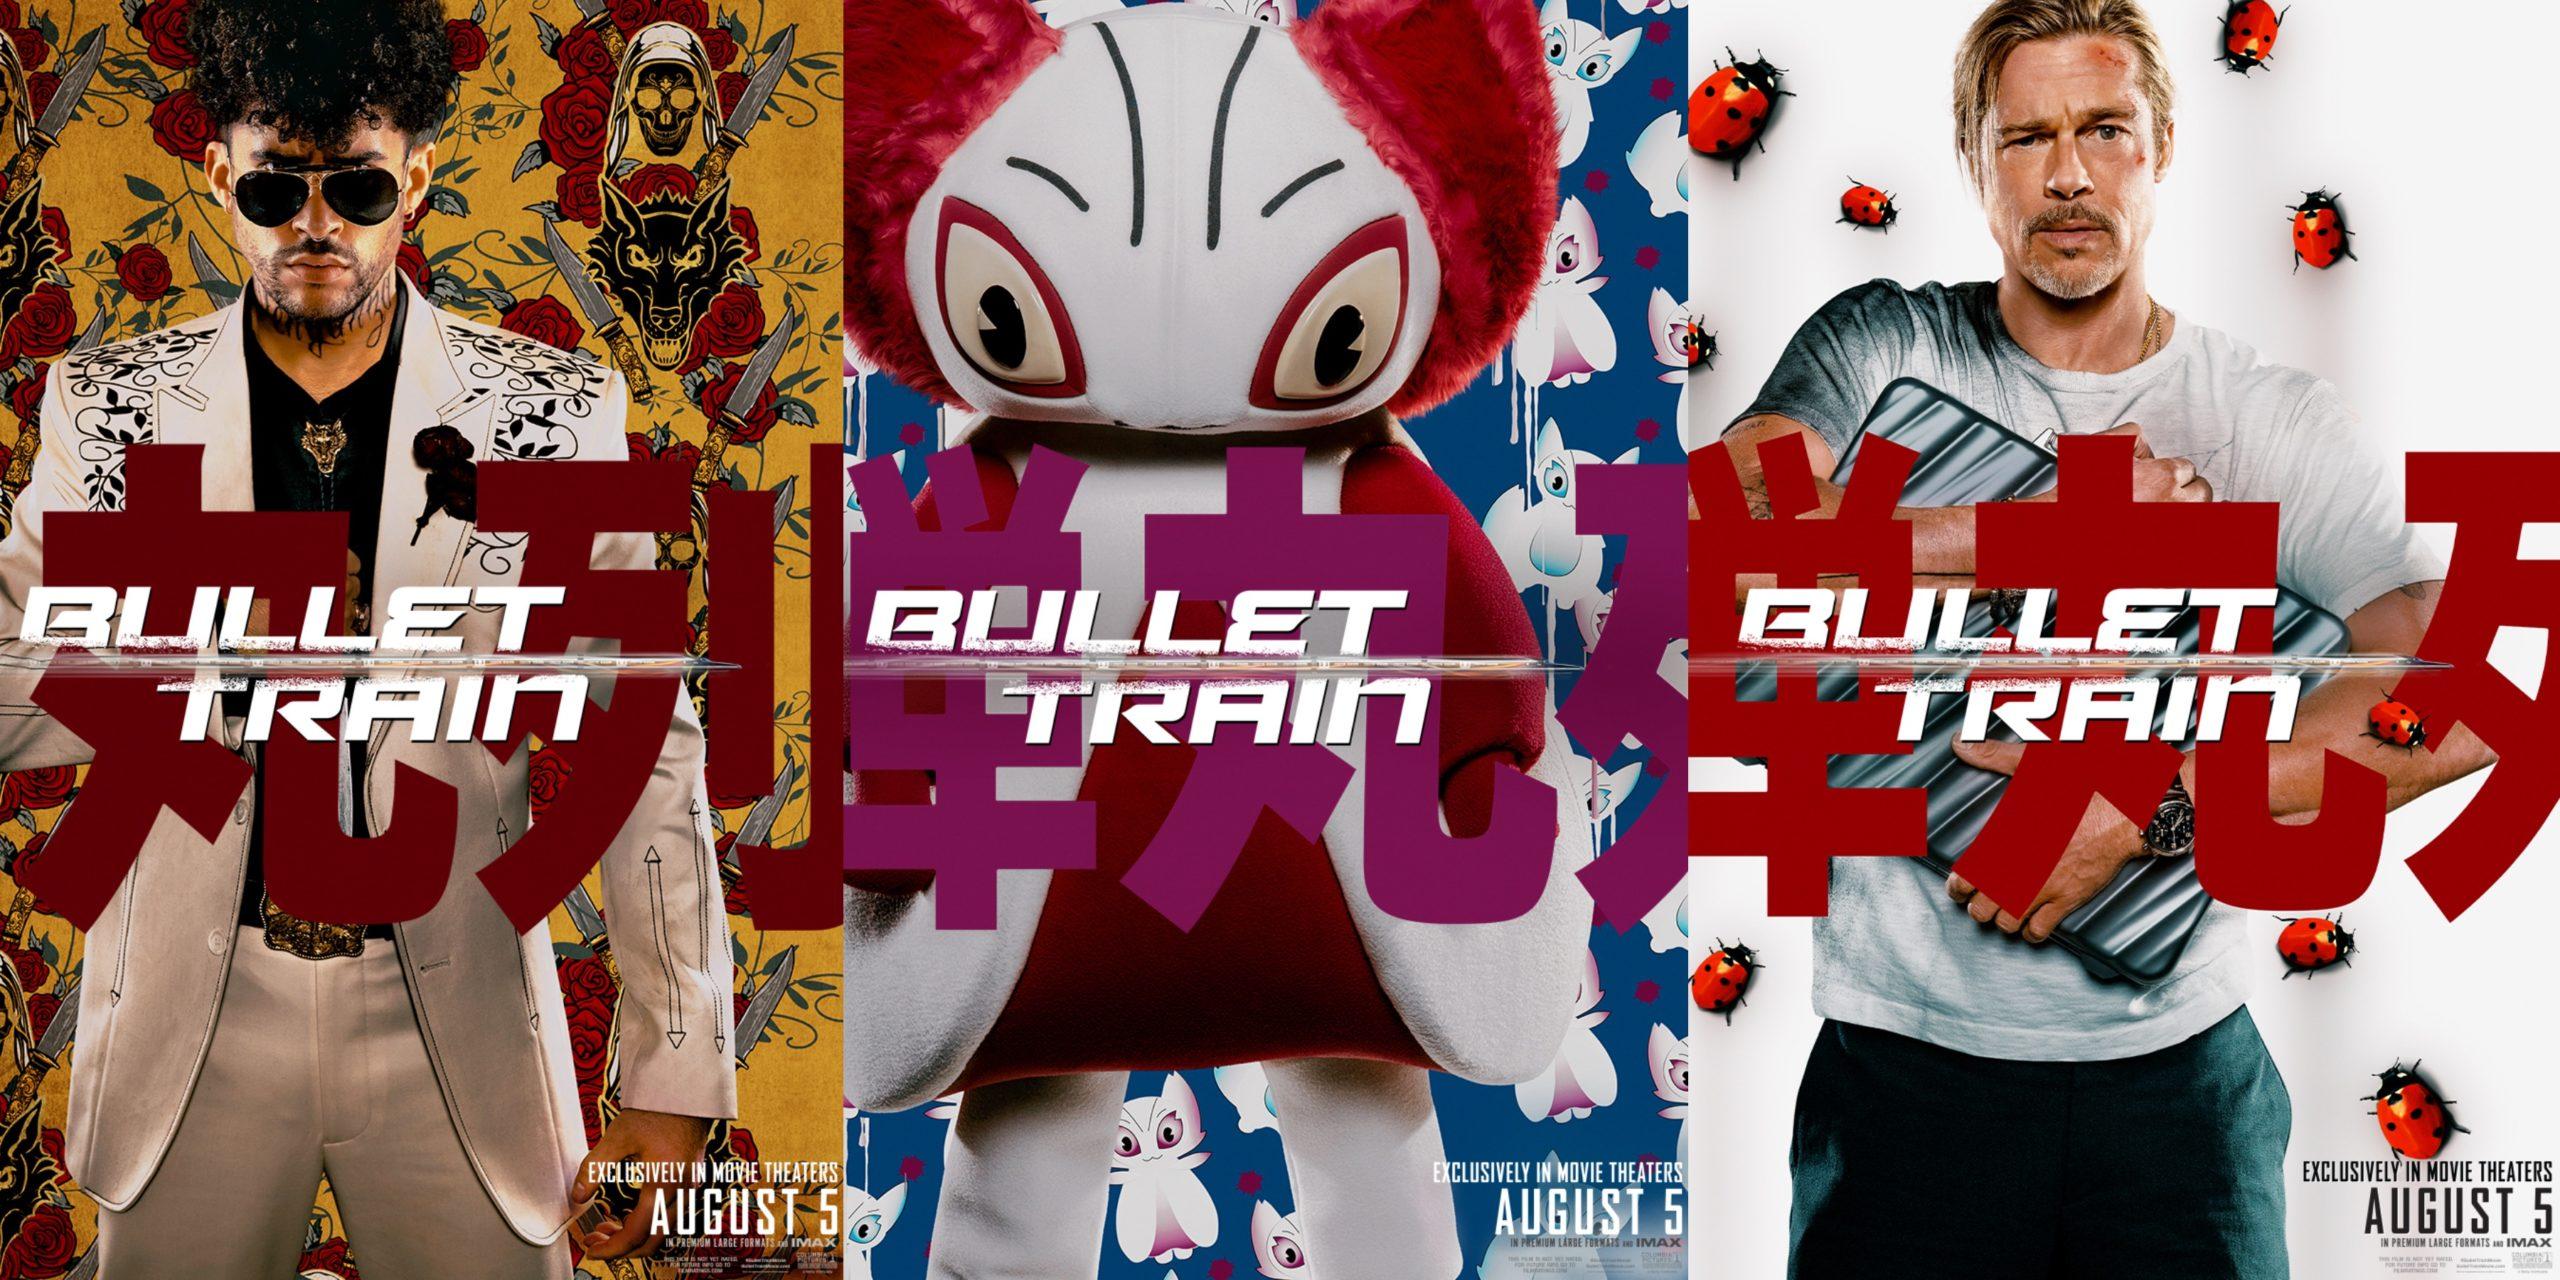 Sony Pictures Unveils Exclusive ‘Bullet Train’ Bad Bunny and Brad Pitt Character Posters. #BulletTrainMovie is in theaters August 5, 2022 @BulletTrainMovie